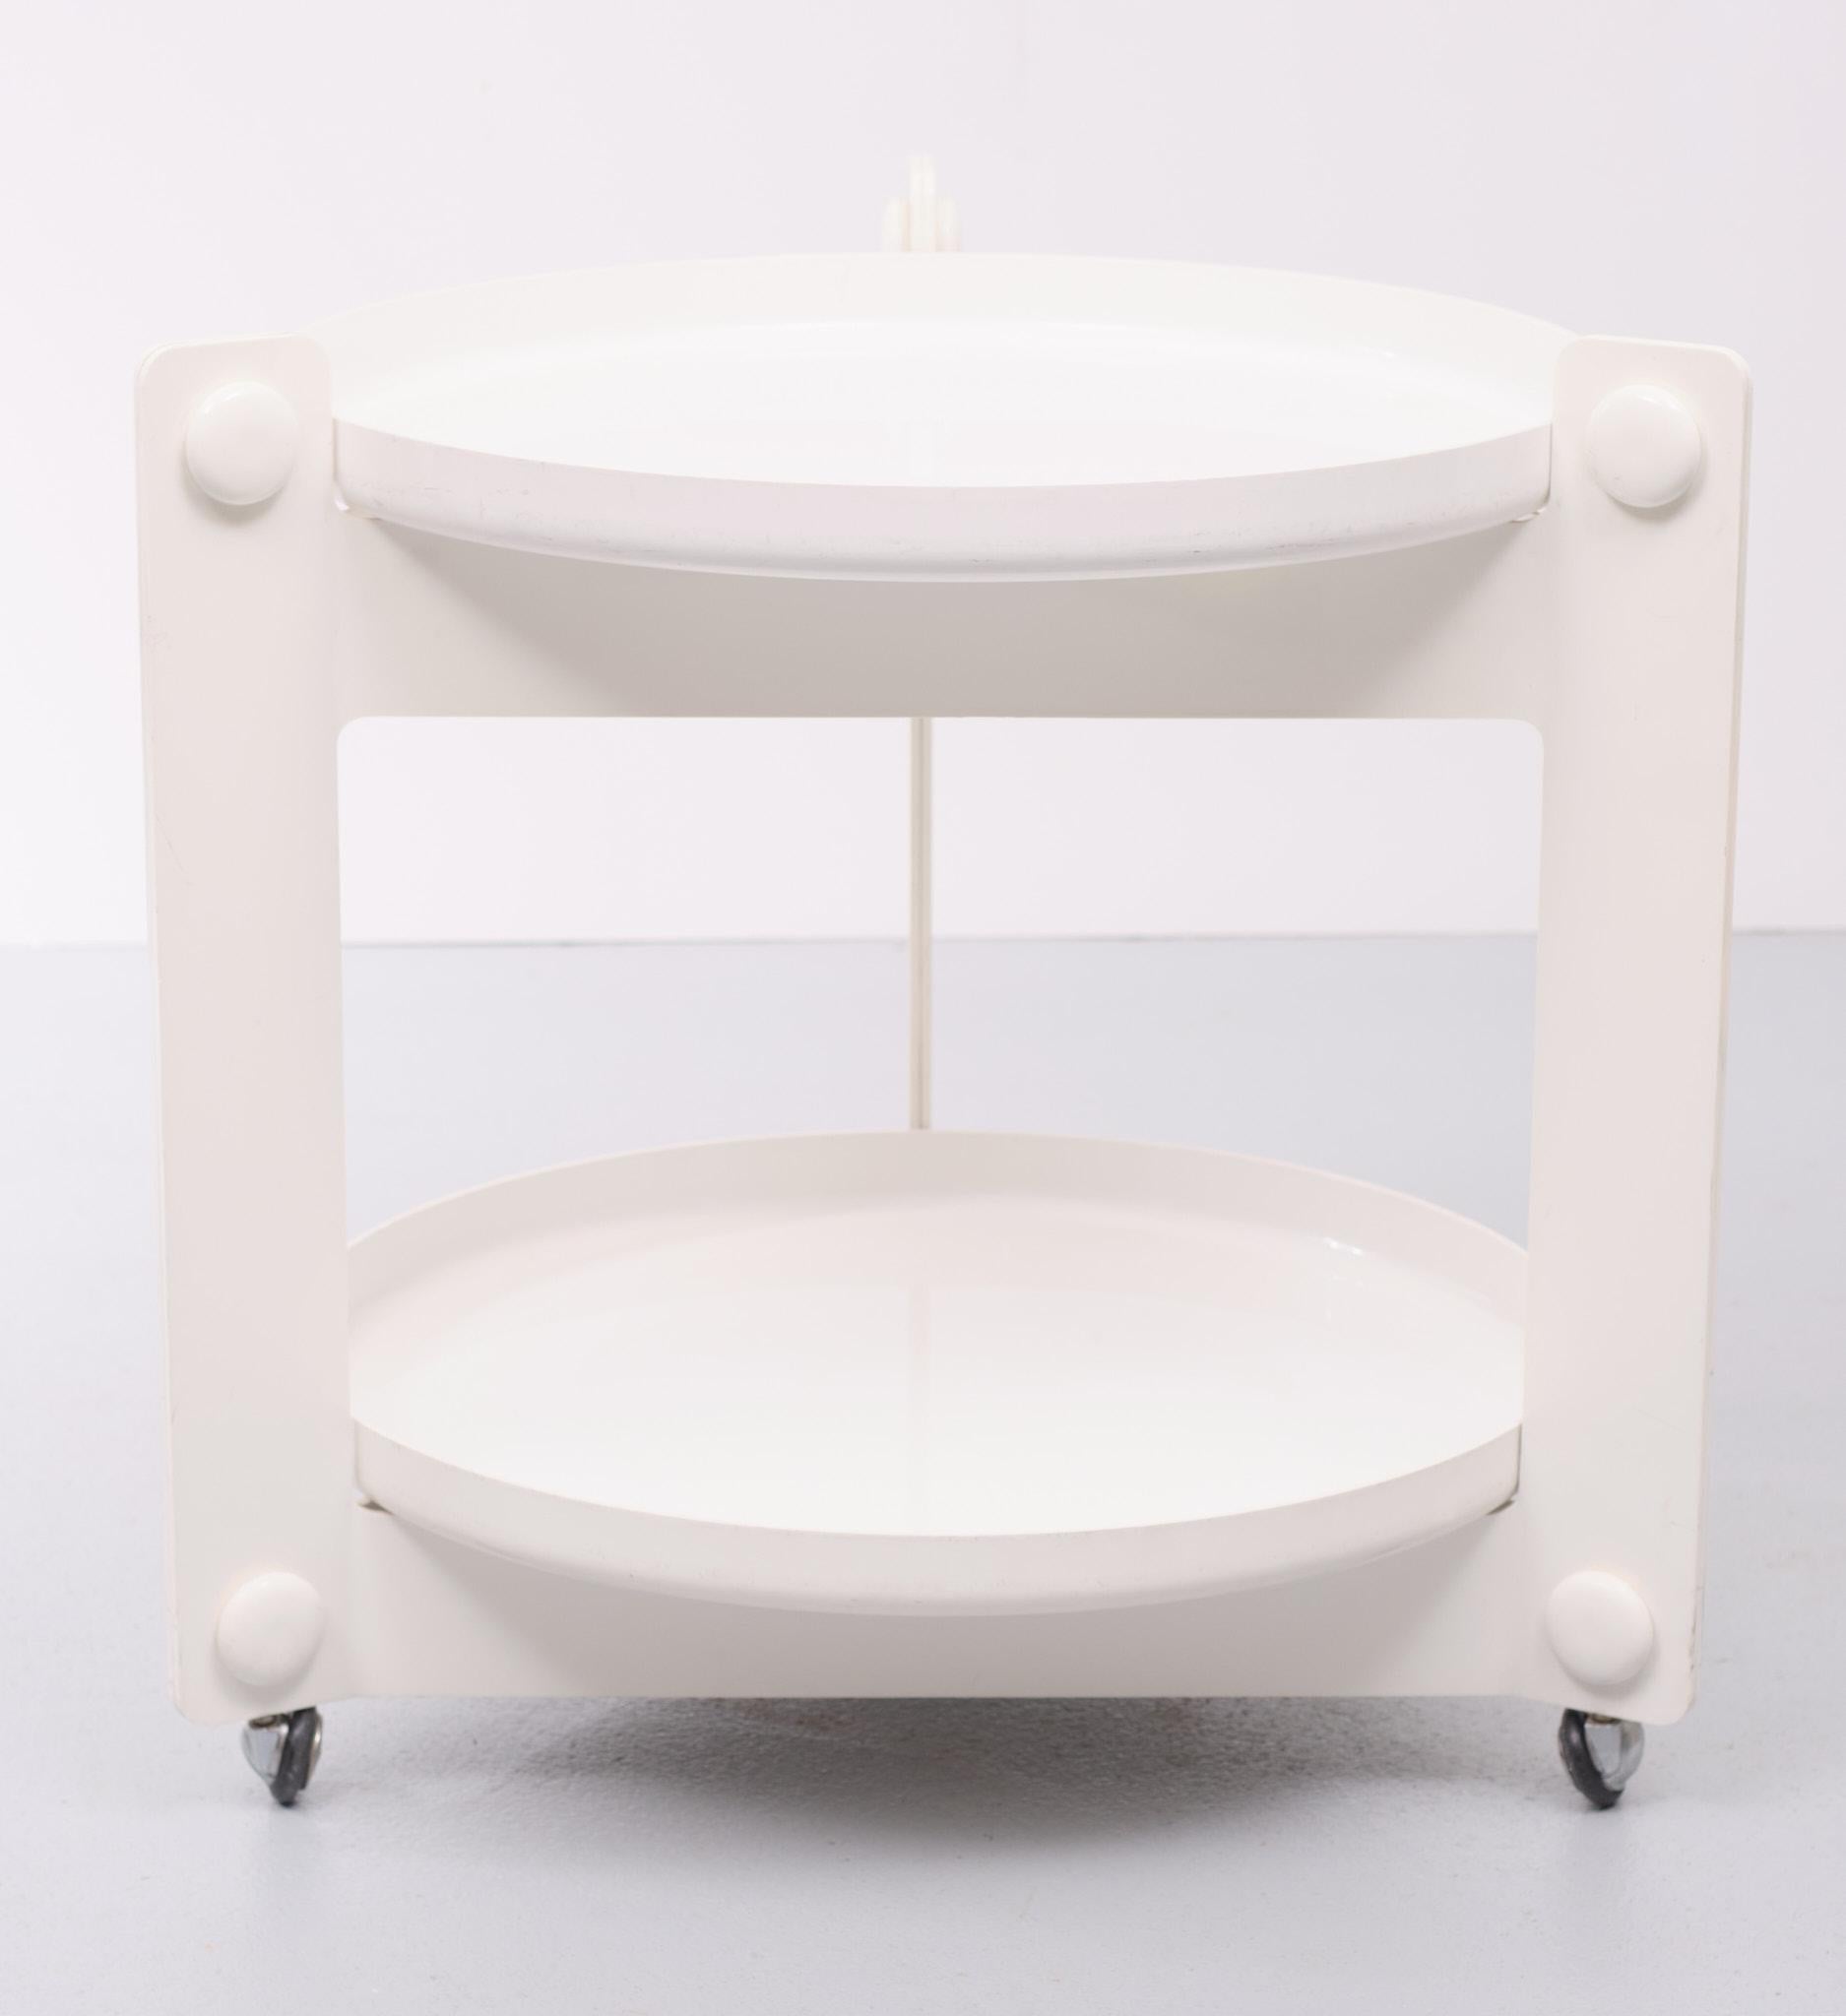 White plastic trolley This 1970s Italian serving trolley was designed by Luigi Massoni for Guzzini. The trolley features two trays, made of white plastic. The two removable circular trays sit within the triangular structures.